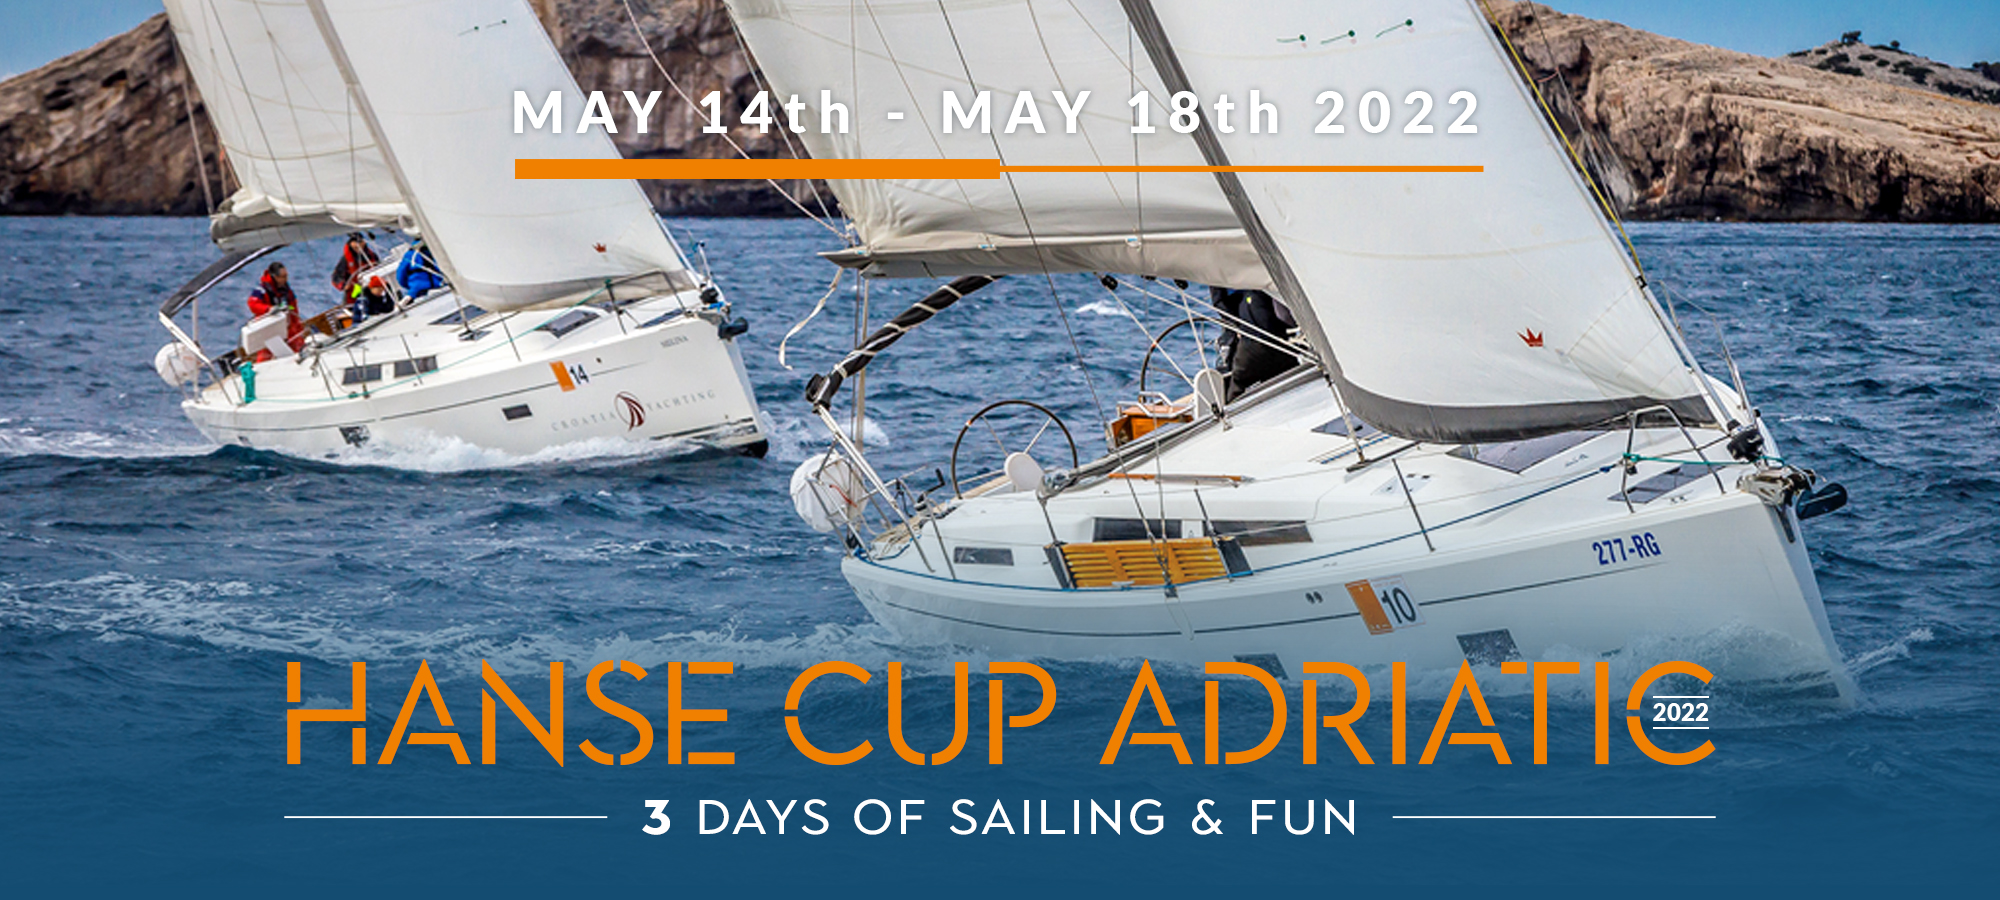 Register now for Hanse Cup Adriatic 2022